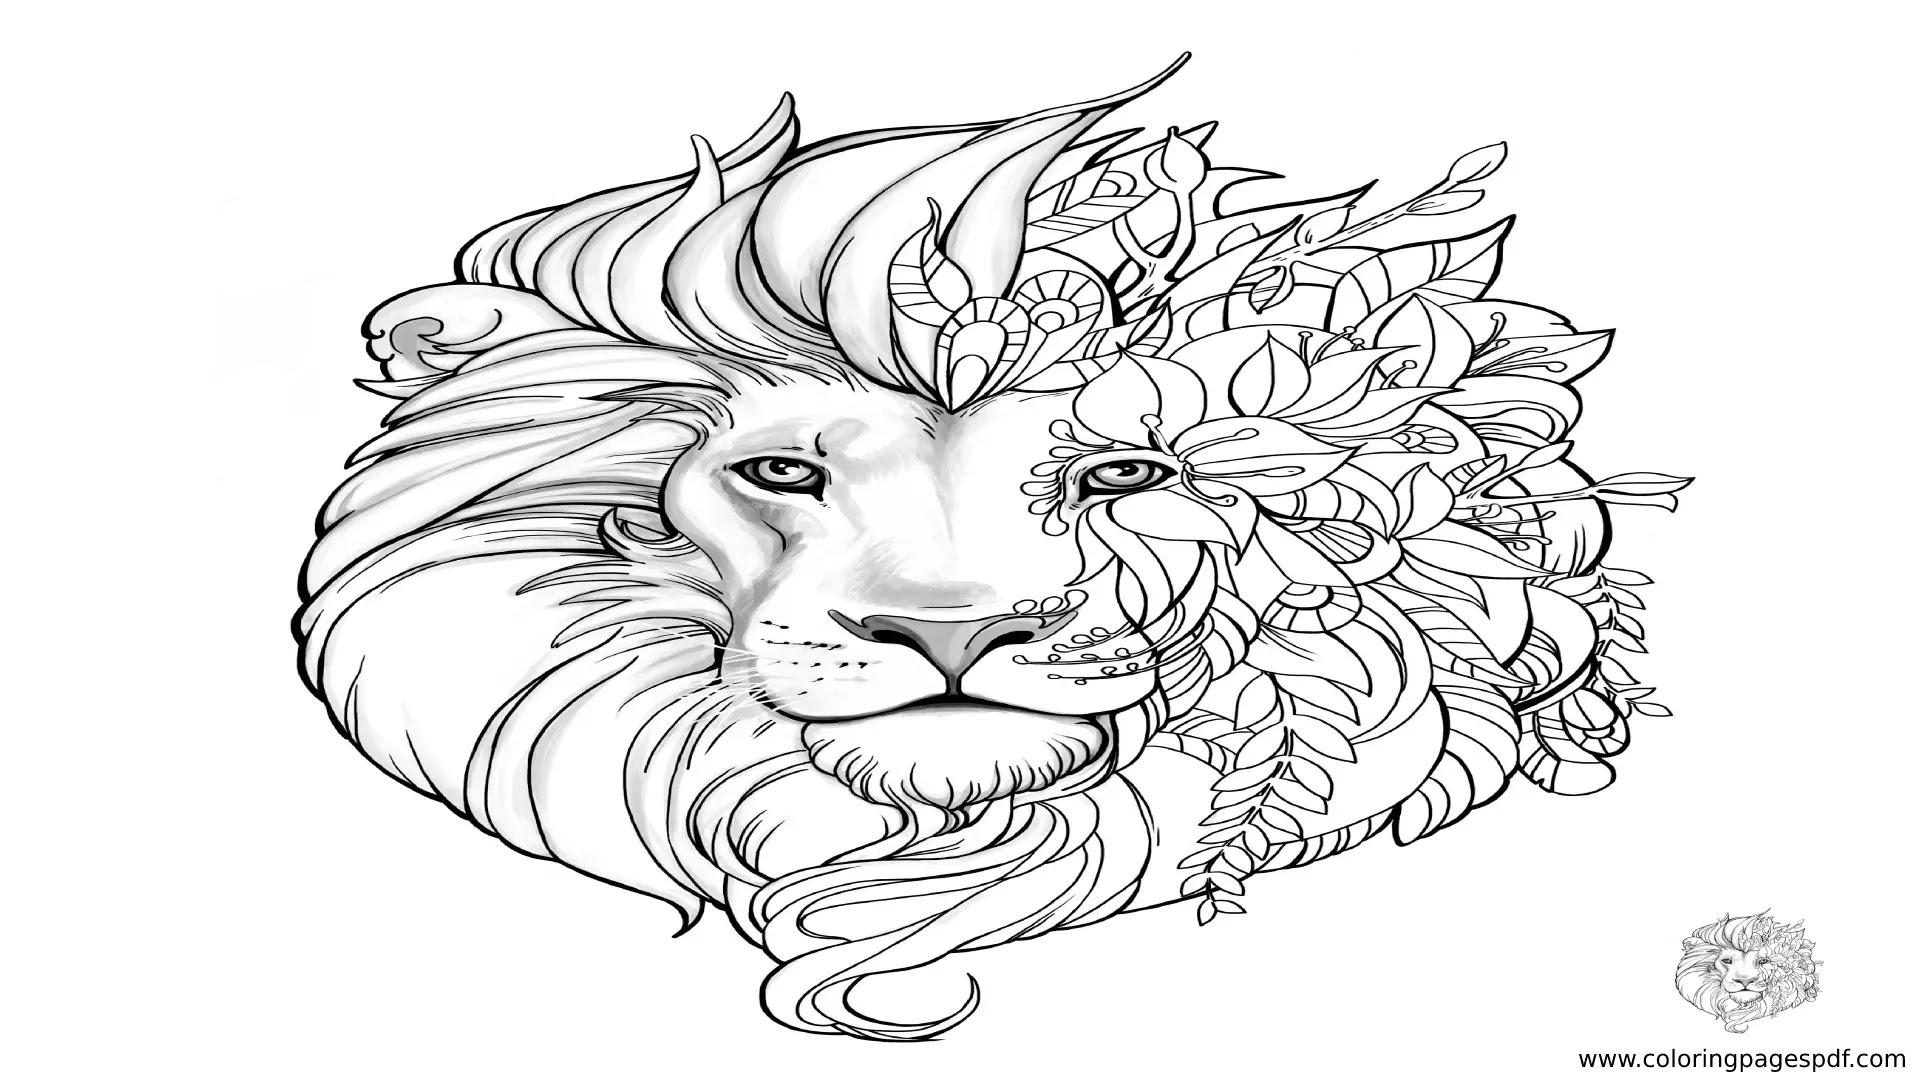 Coloring Pages Of Lion With Flowered Half Face